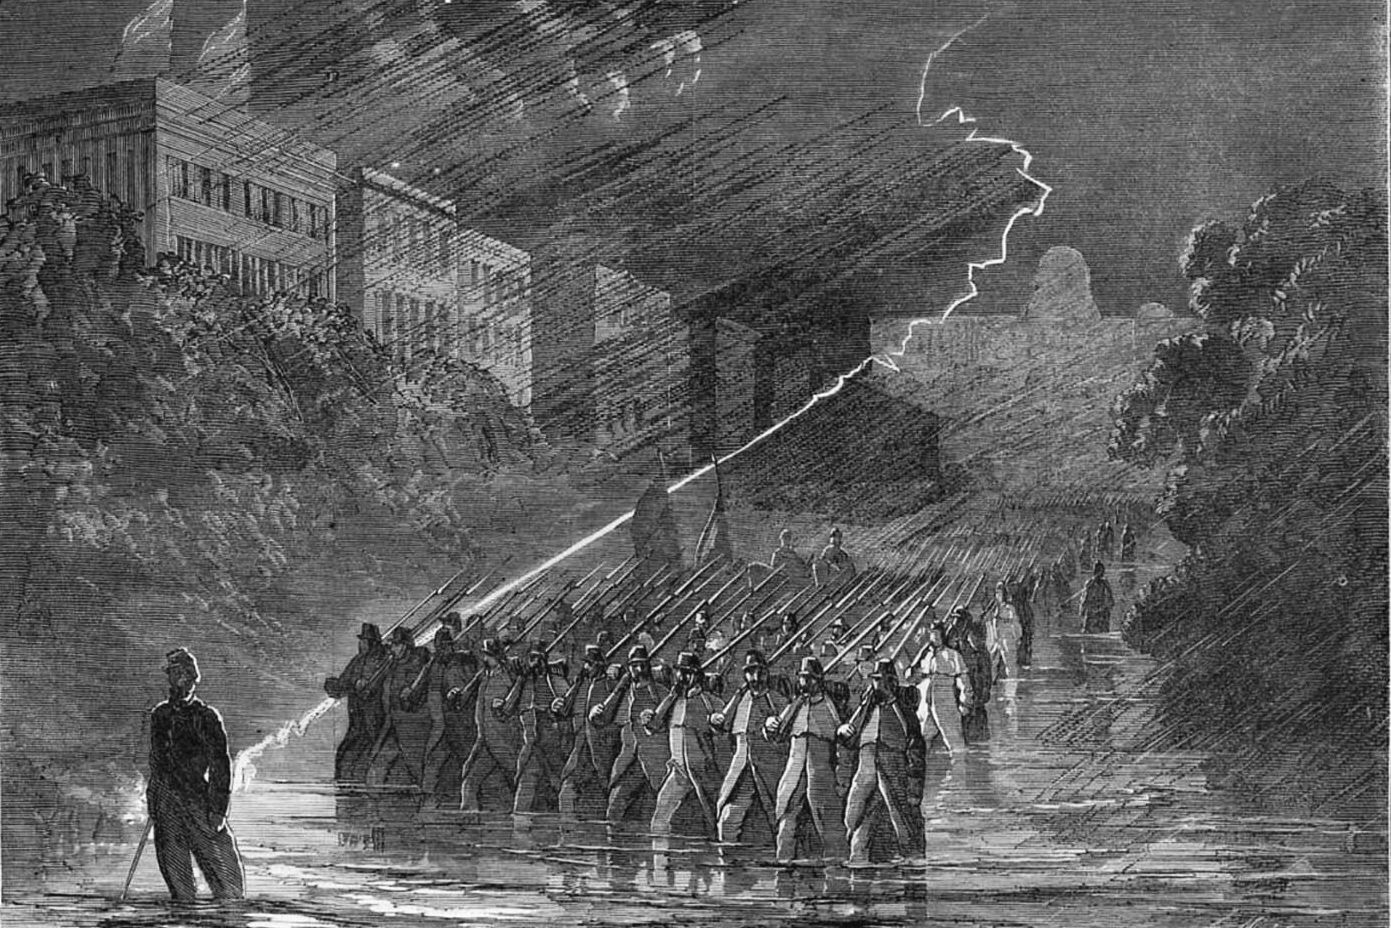 Julia Ward Howe and her group of Boston dignitaries visited with troops from the Massachusetts 14th Regiment, show in a Harper's Weekly engraving marching down Pennsylvania Avenue in a lightning storm.